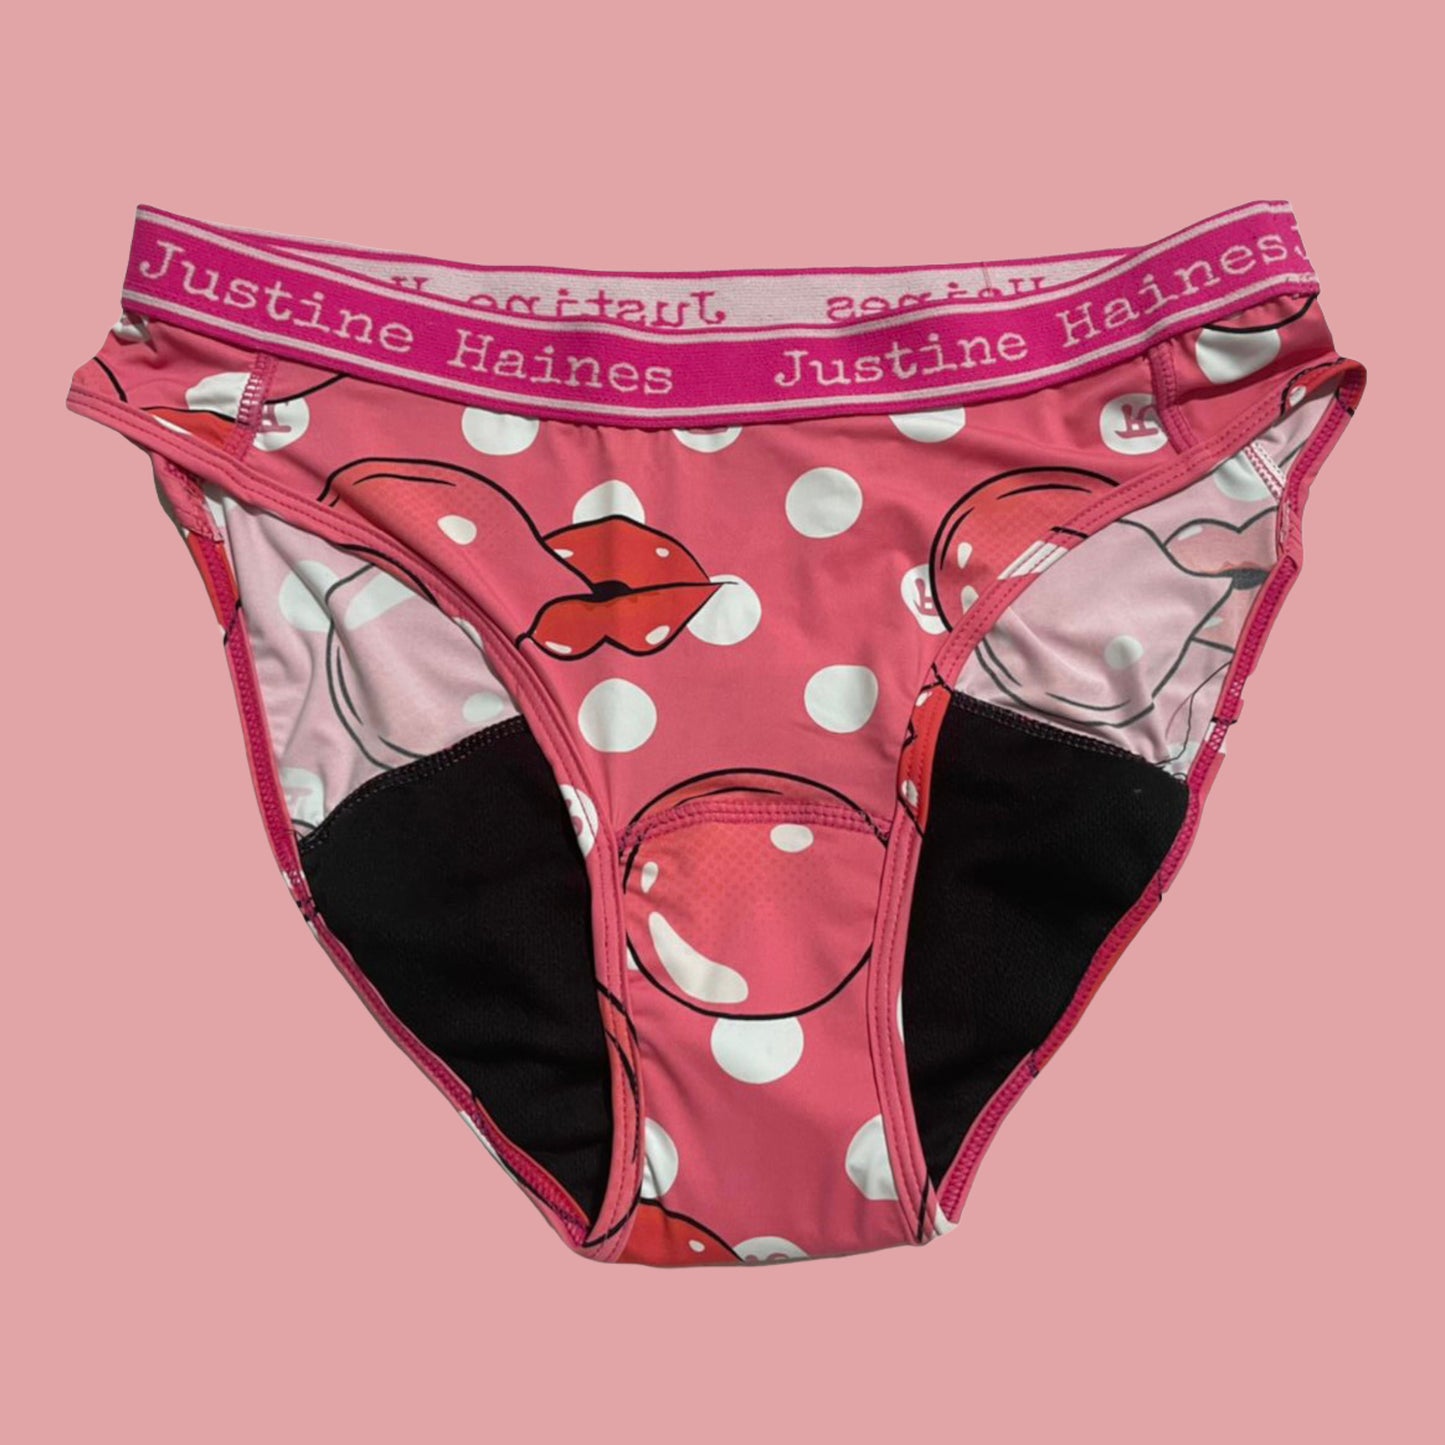 https://www.justinehaines.com/products/adorable-low-rise-fashion-print-period-panties-in-pink-bubble-gum